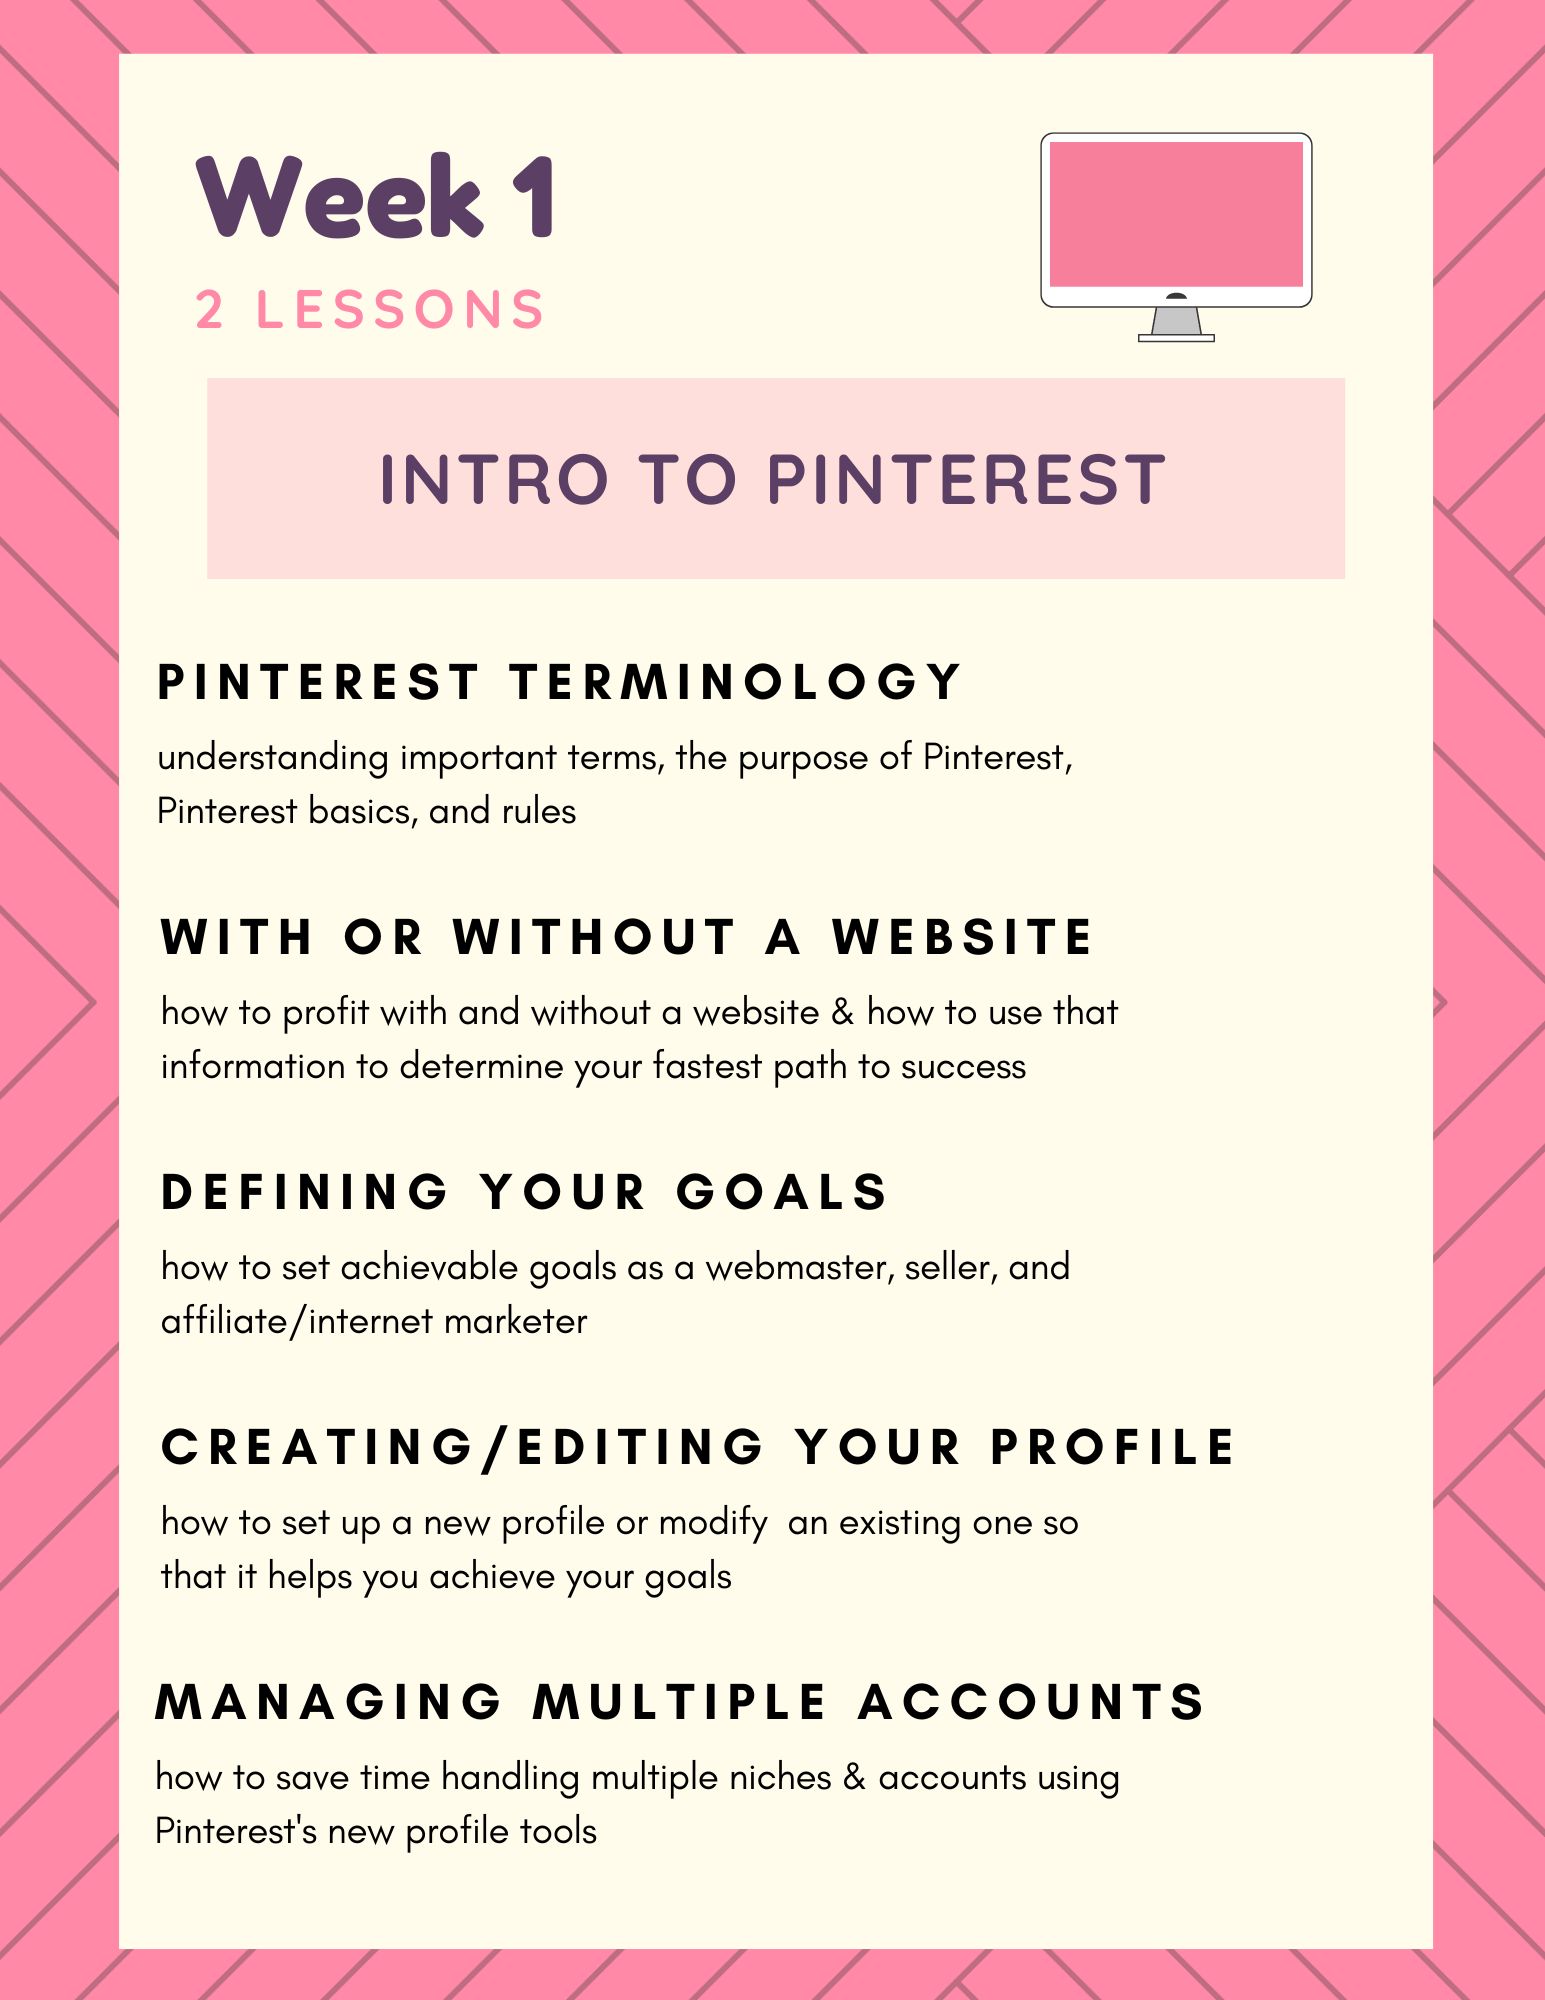 overview of week 1 course topics - intro to pinterest